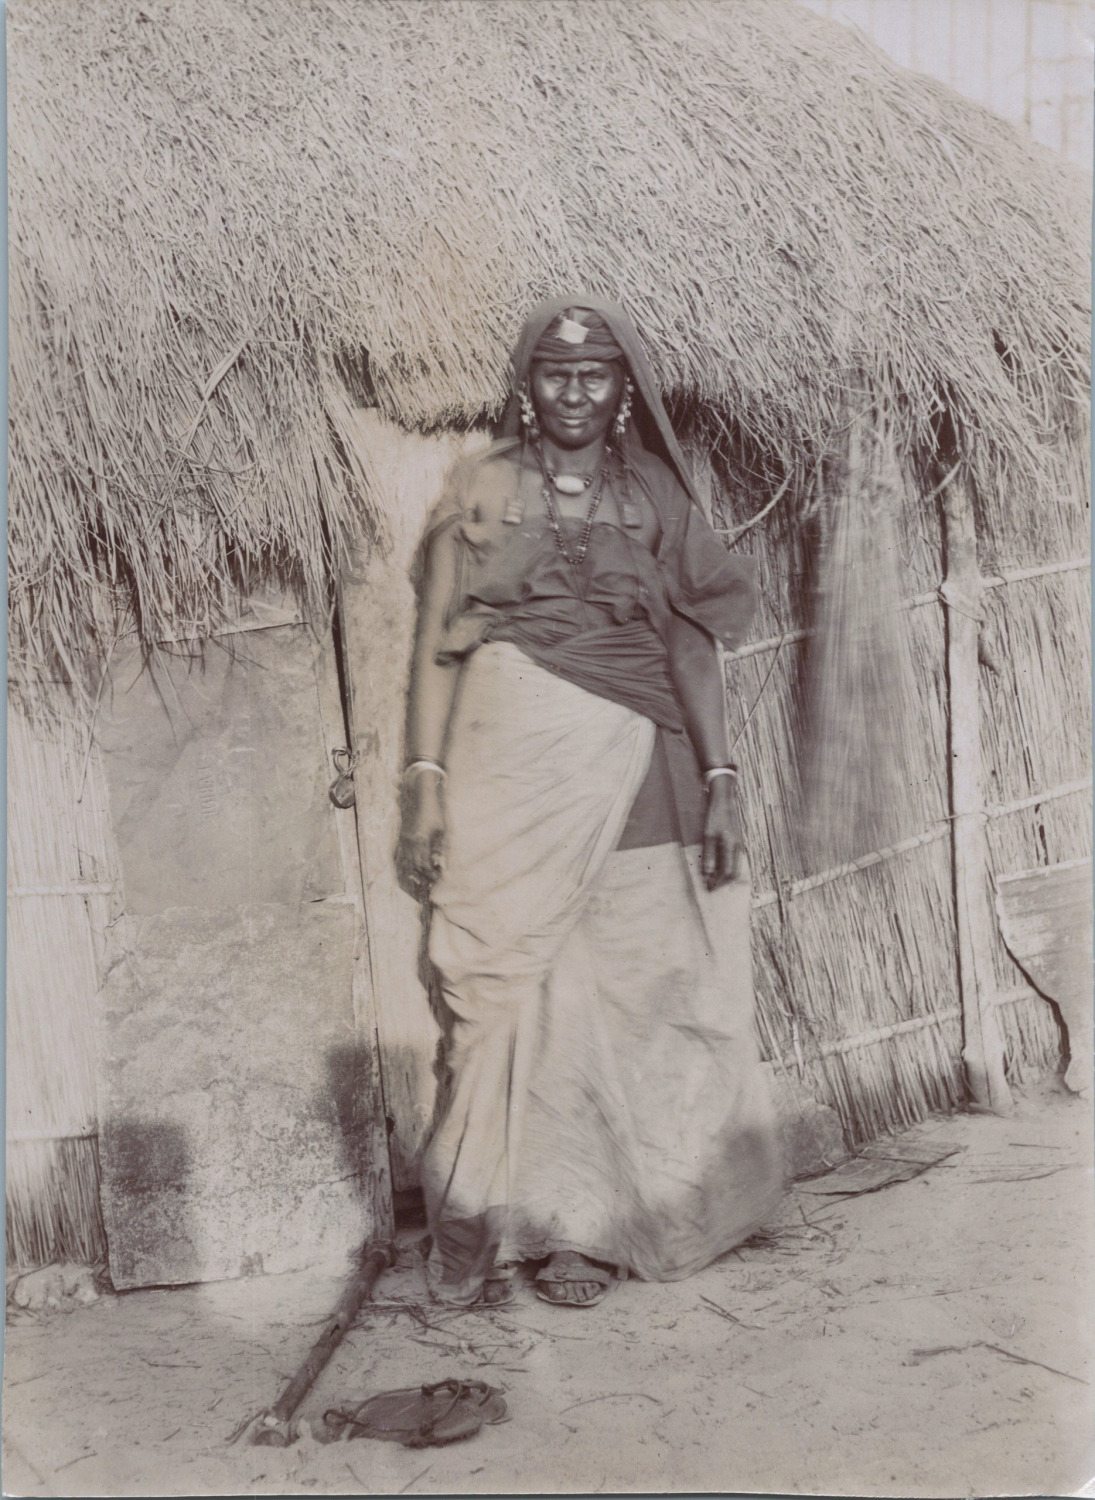 Mauritania, woman in front of her house, vintage print, ca.1900 vintage print shot